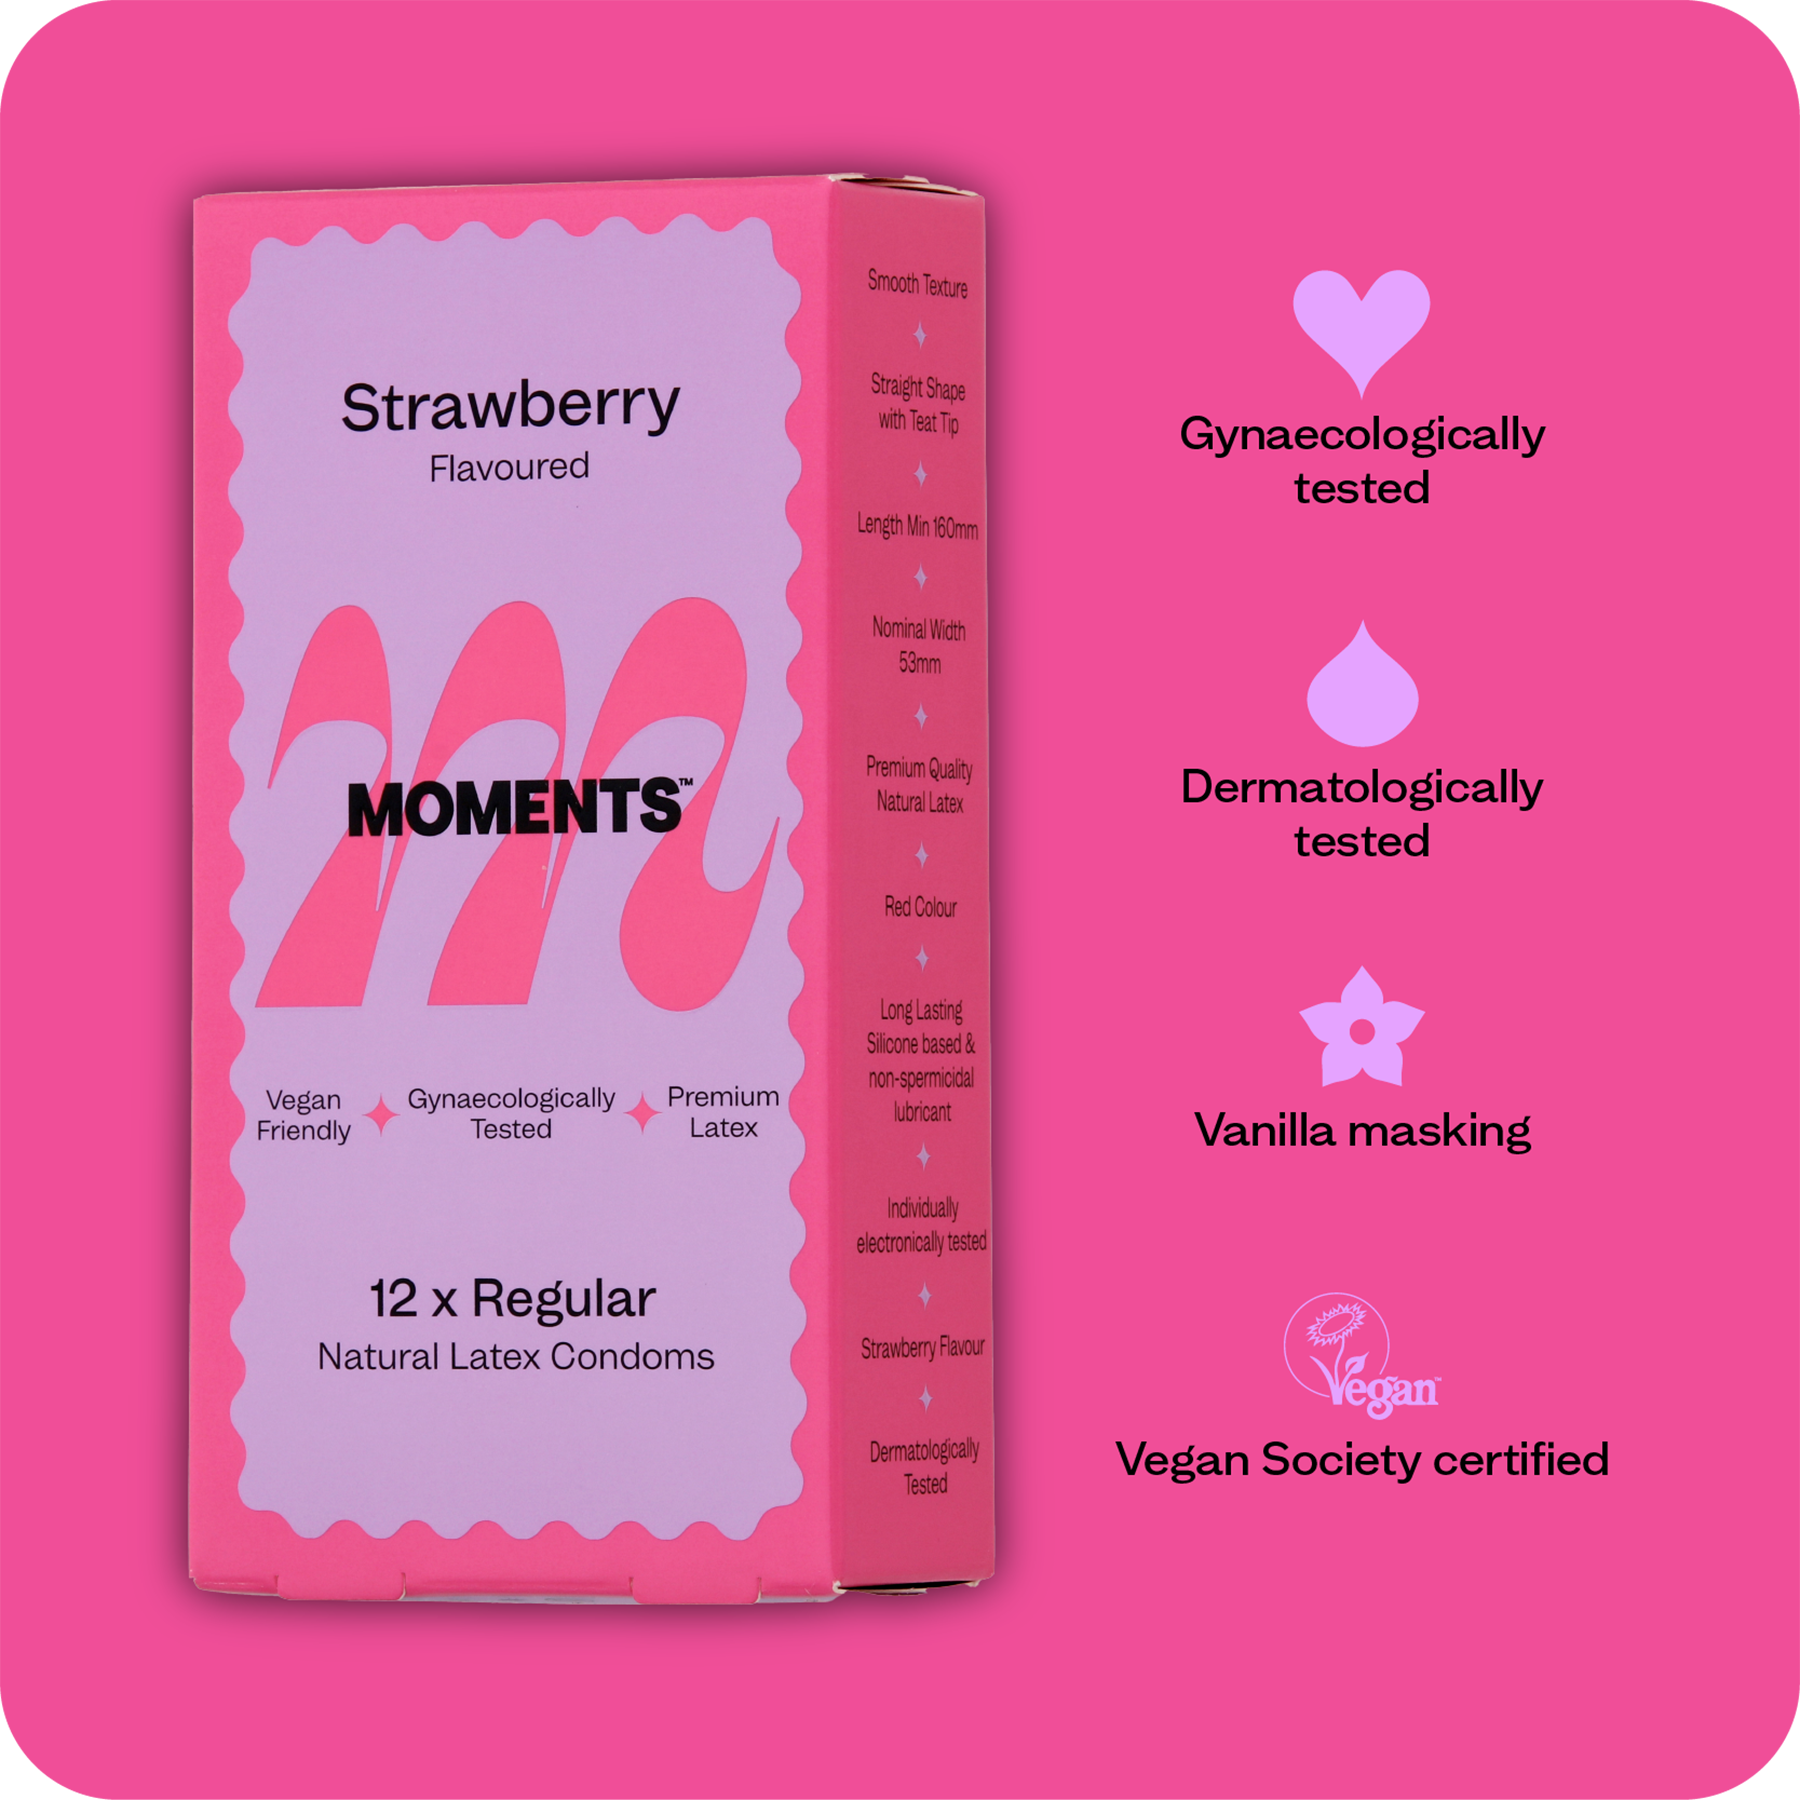 Moments Strawberry